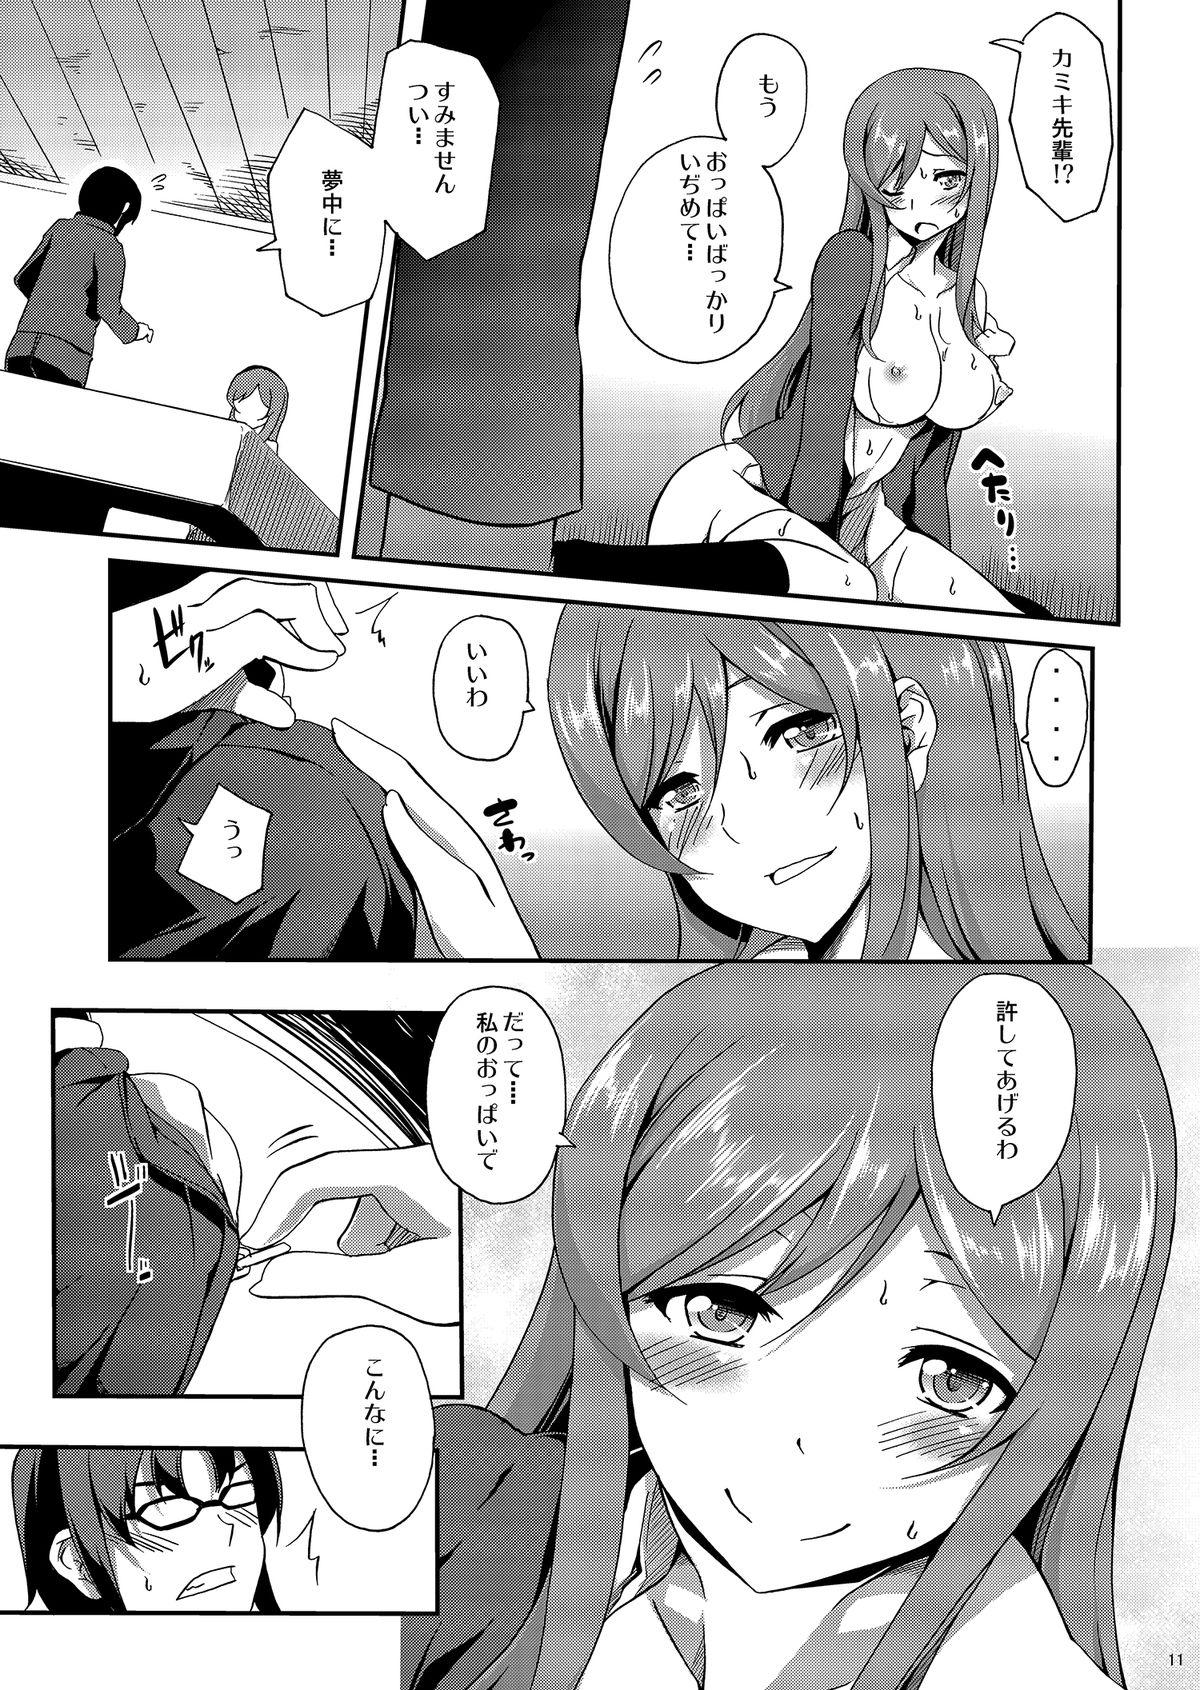 Homosexual Mirai no Onegai - Gundam build fighters try Cheating - Page 10